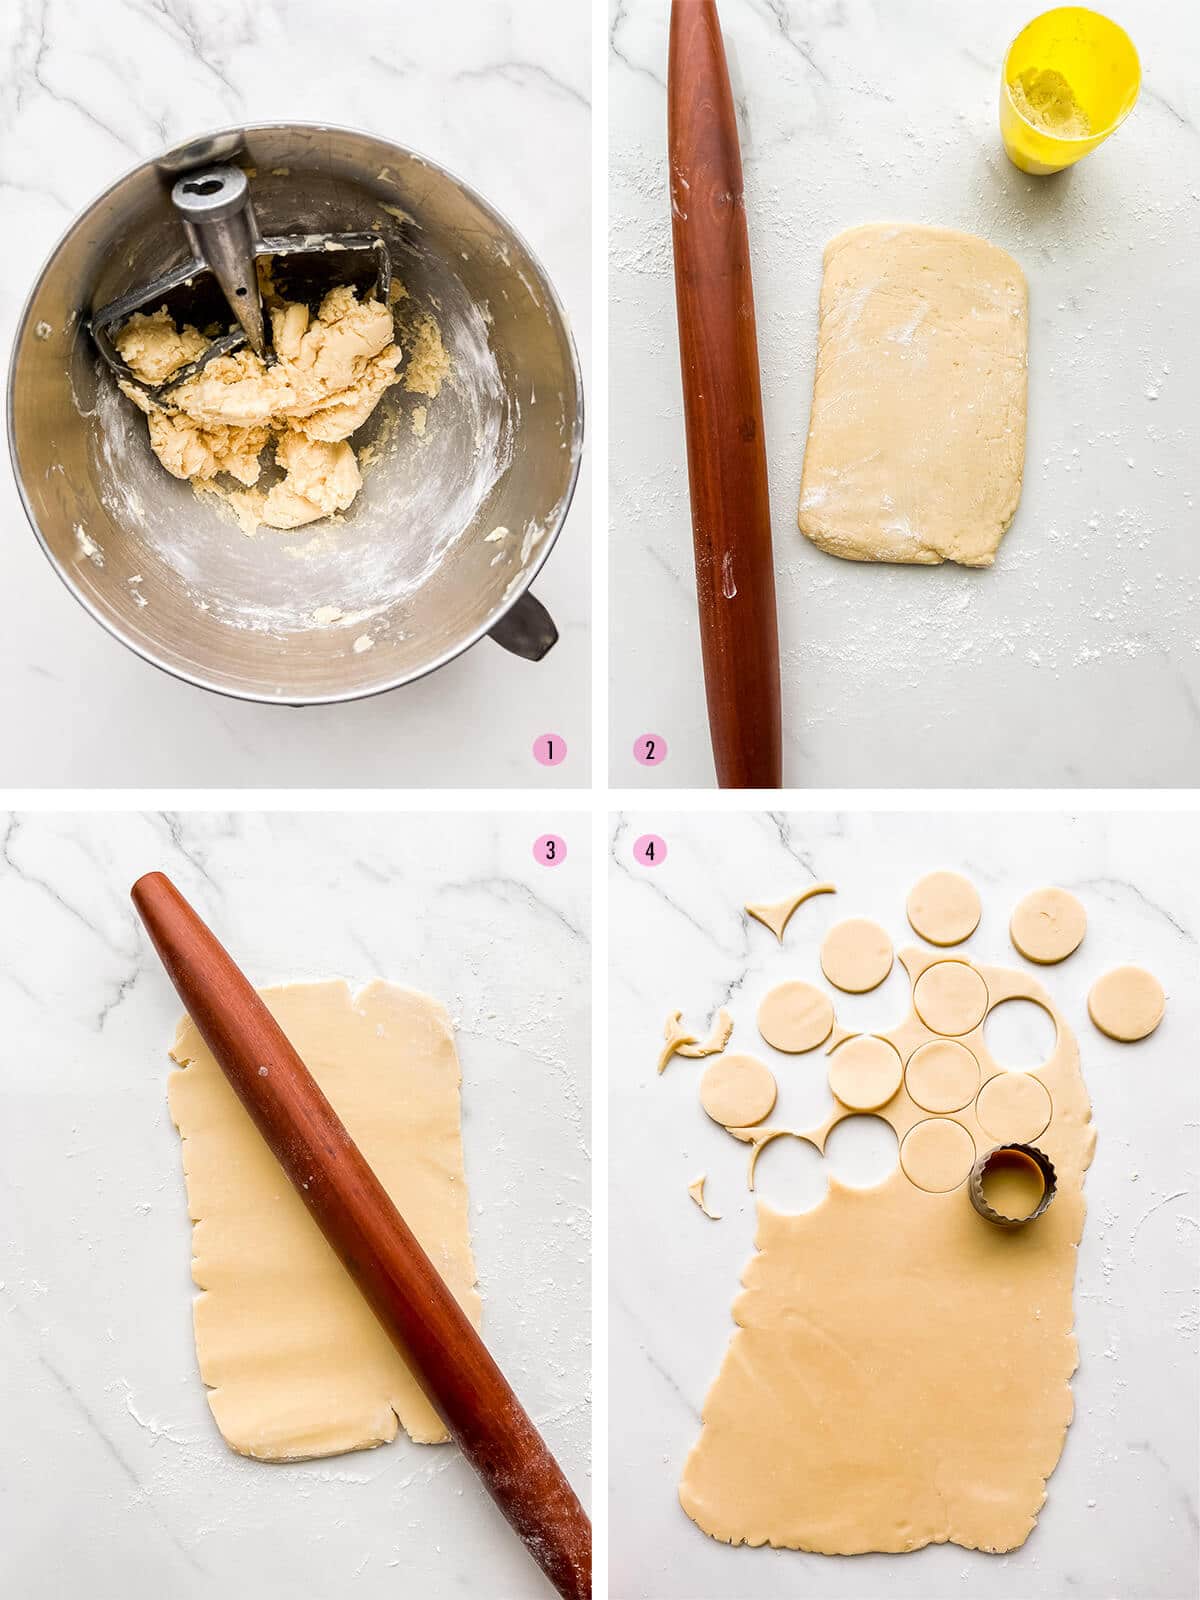 Collage of steps to make cutout shortbread cookies, including making the dough with the mixer in image 1, flouring the counter to roll out the chilled dough in image 2, rolling out the dough with a wood rolling pin in image 3, and cutting out perfect circles with a cookie cutter in image 4.